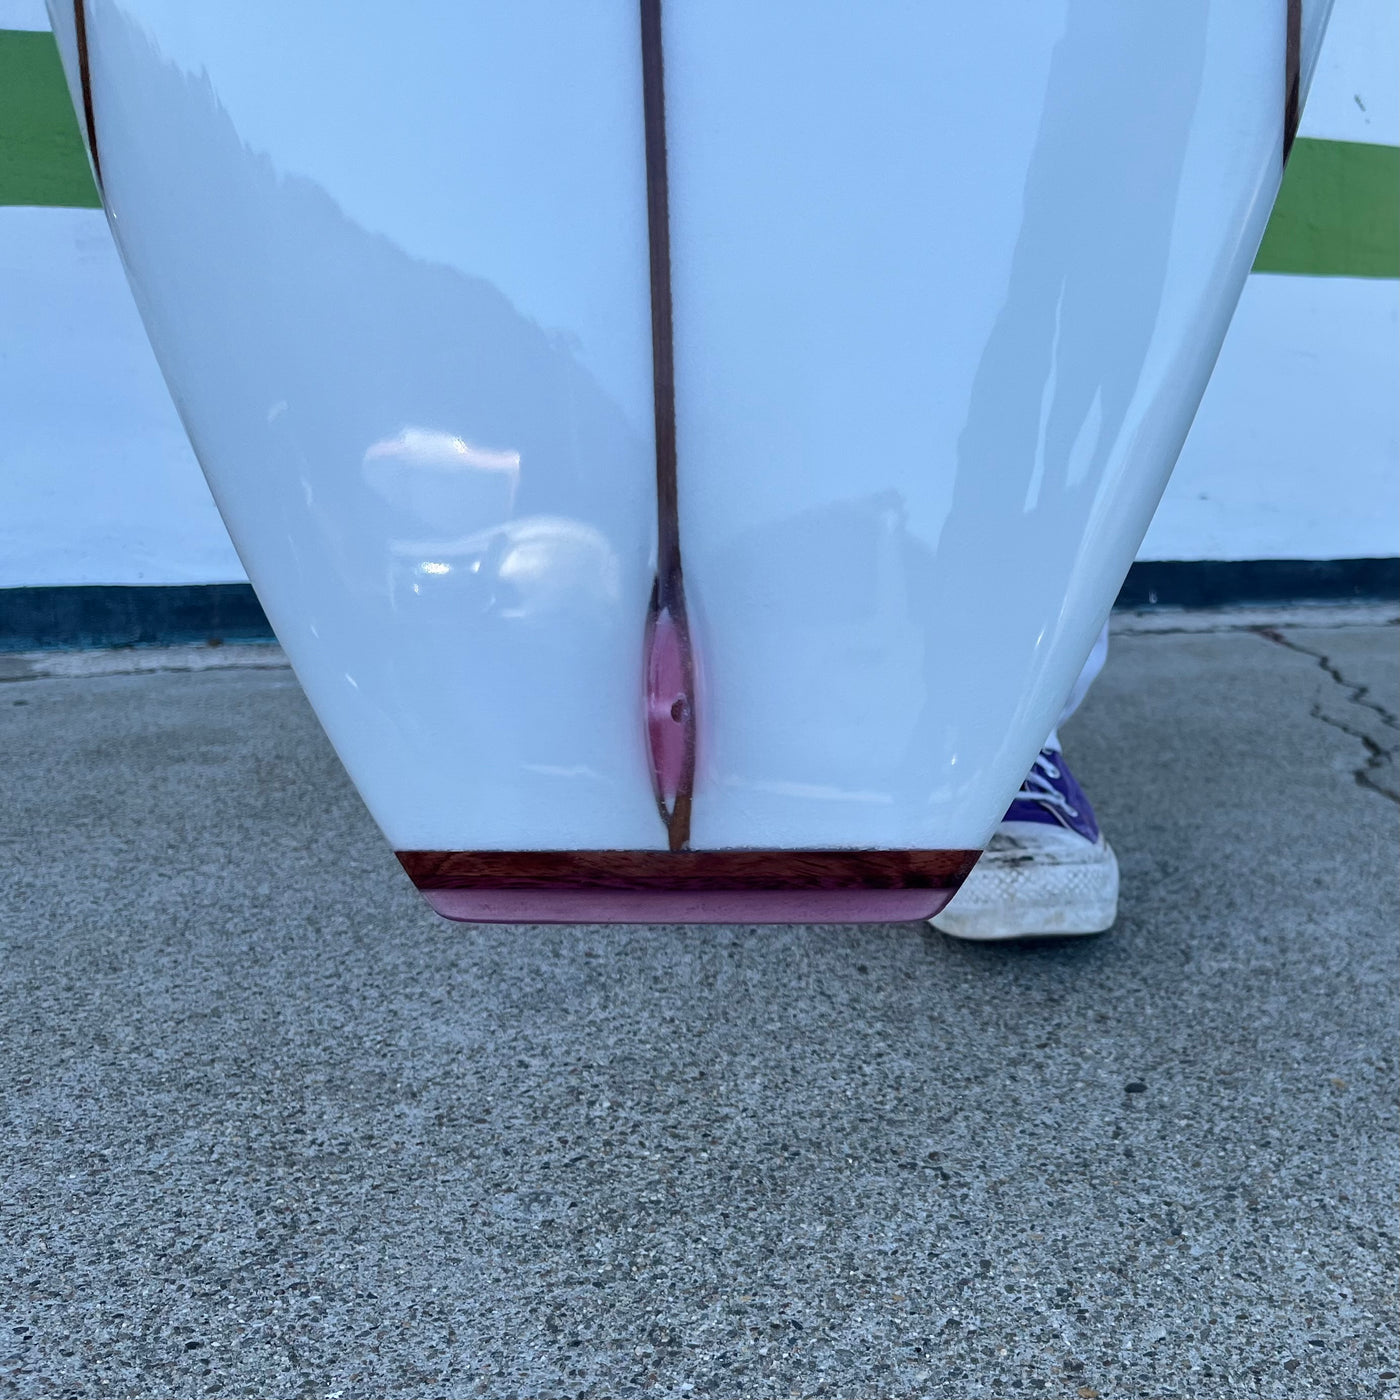 8'8" John Schultze Log With Colored Resin Tail Block